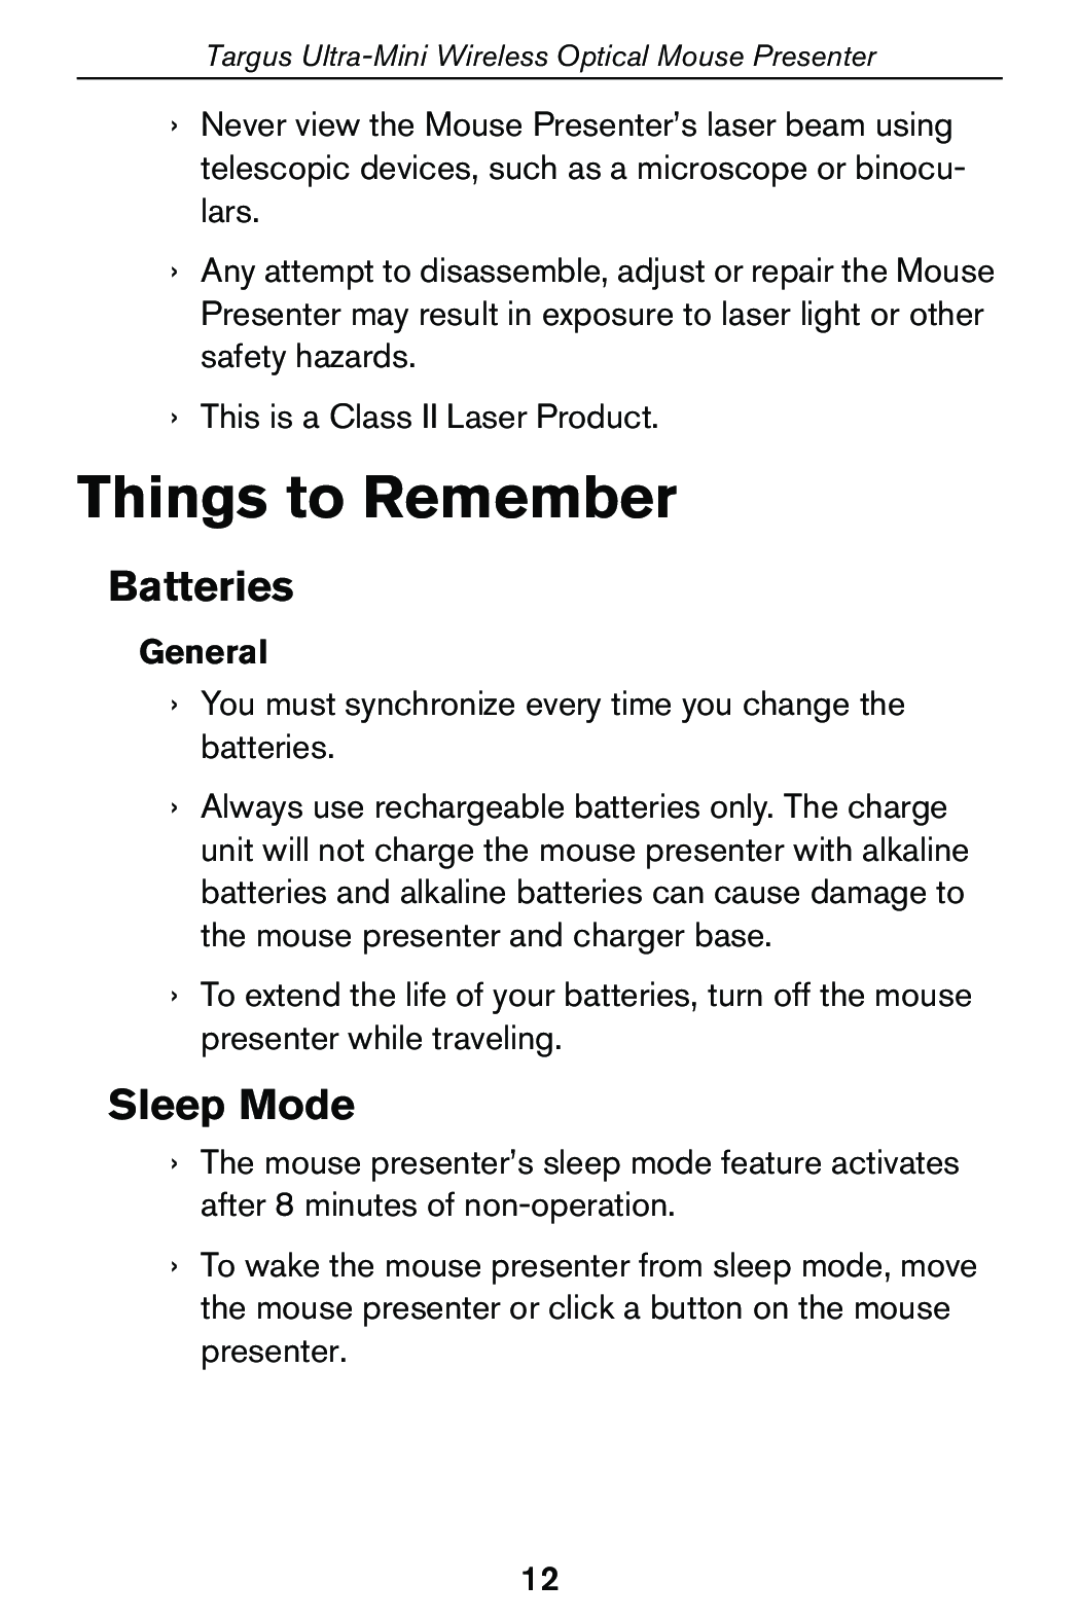 Targus 400-0140-001A specifications Things to Remember, Batteries, Sleep Mode 